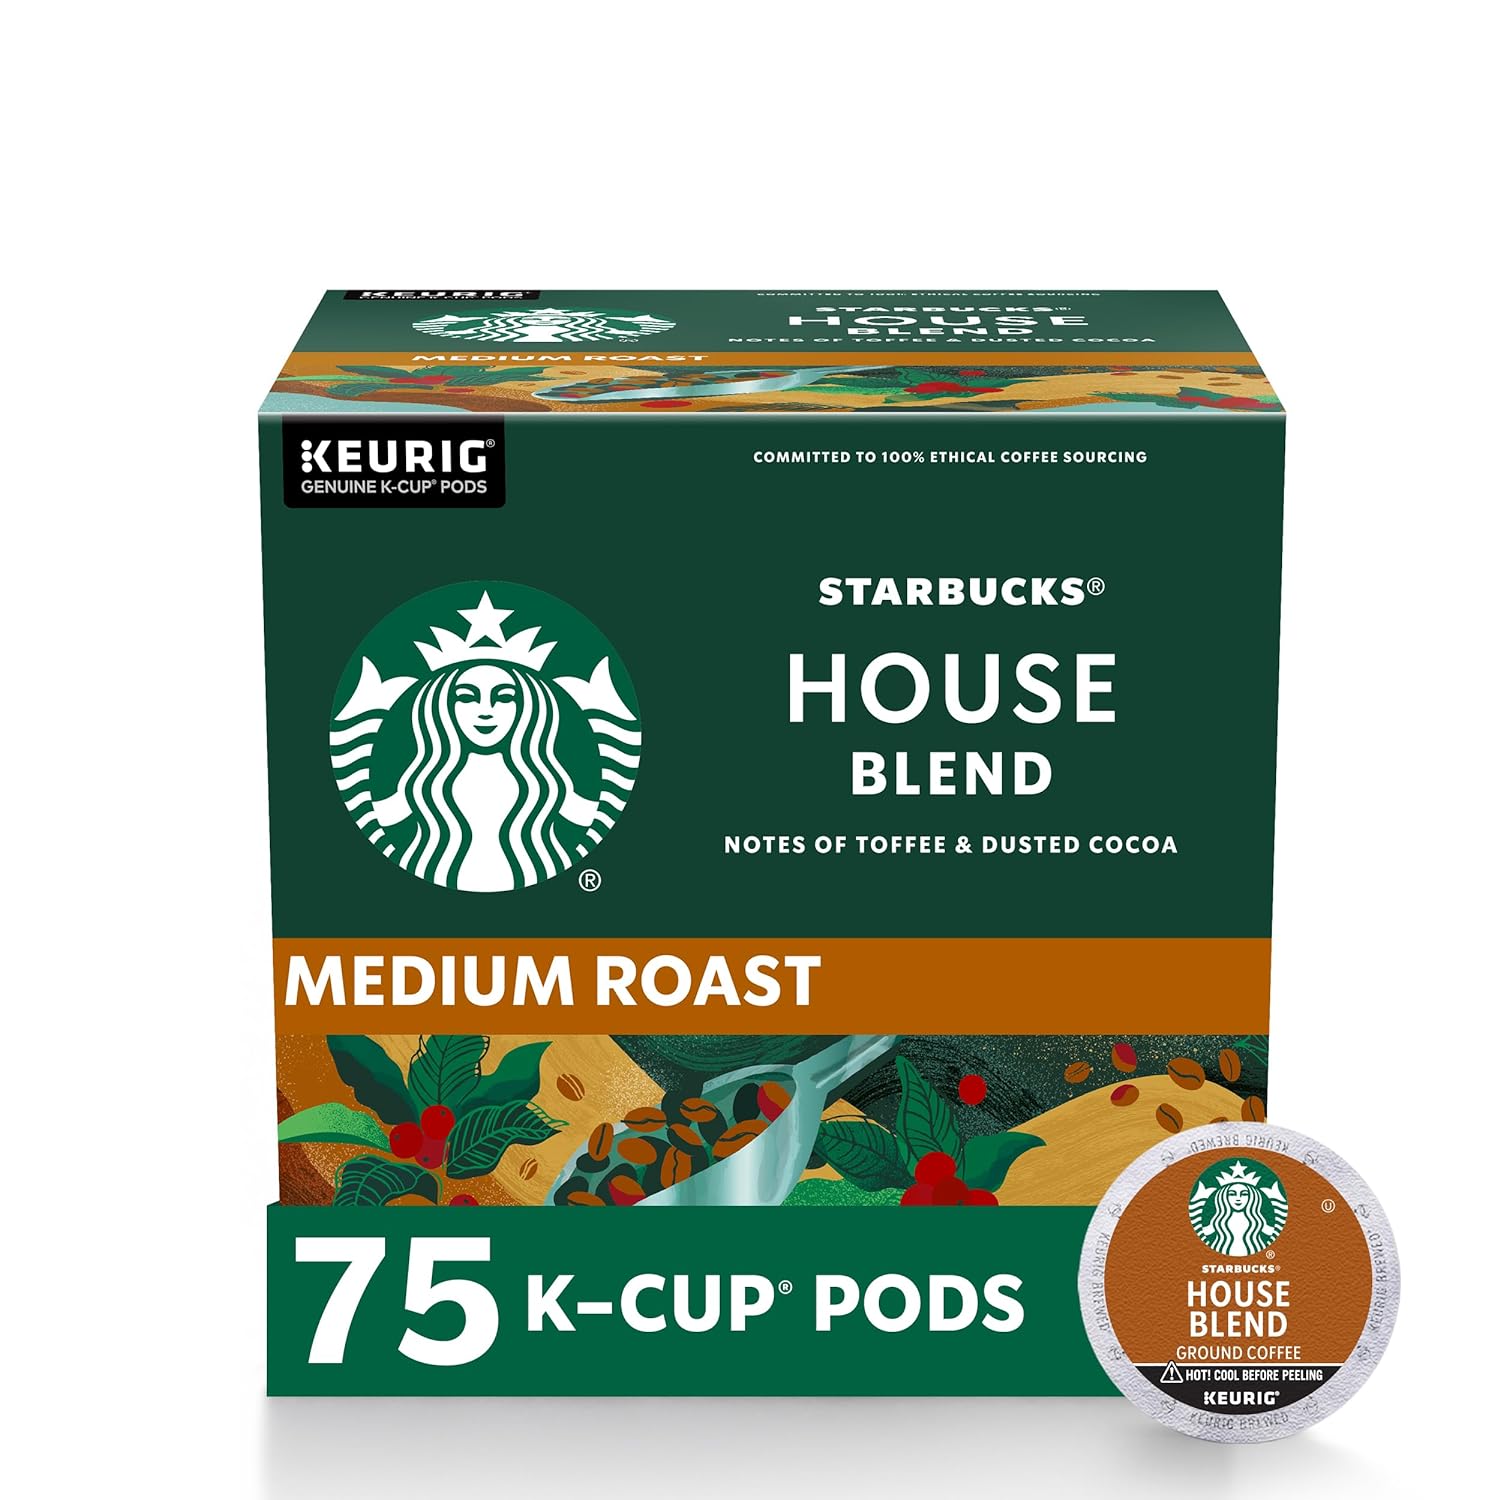 This is my favorite Starbucks blend so I was thrilled to buy it in pods for the office. It is a mellow light roast with a delicious and the Starbucks strength you are expecting but no bitter tones. Love this coffee and the price is moderate.